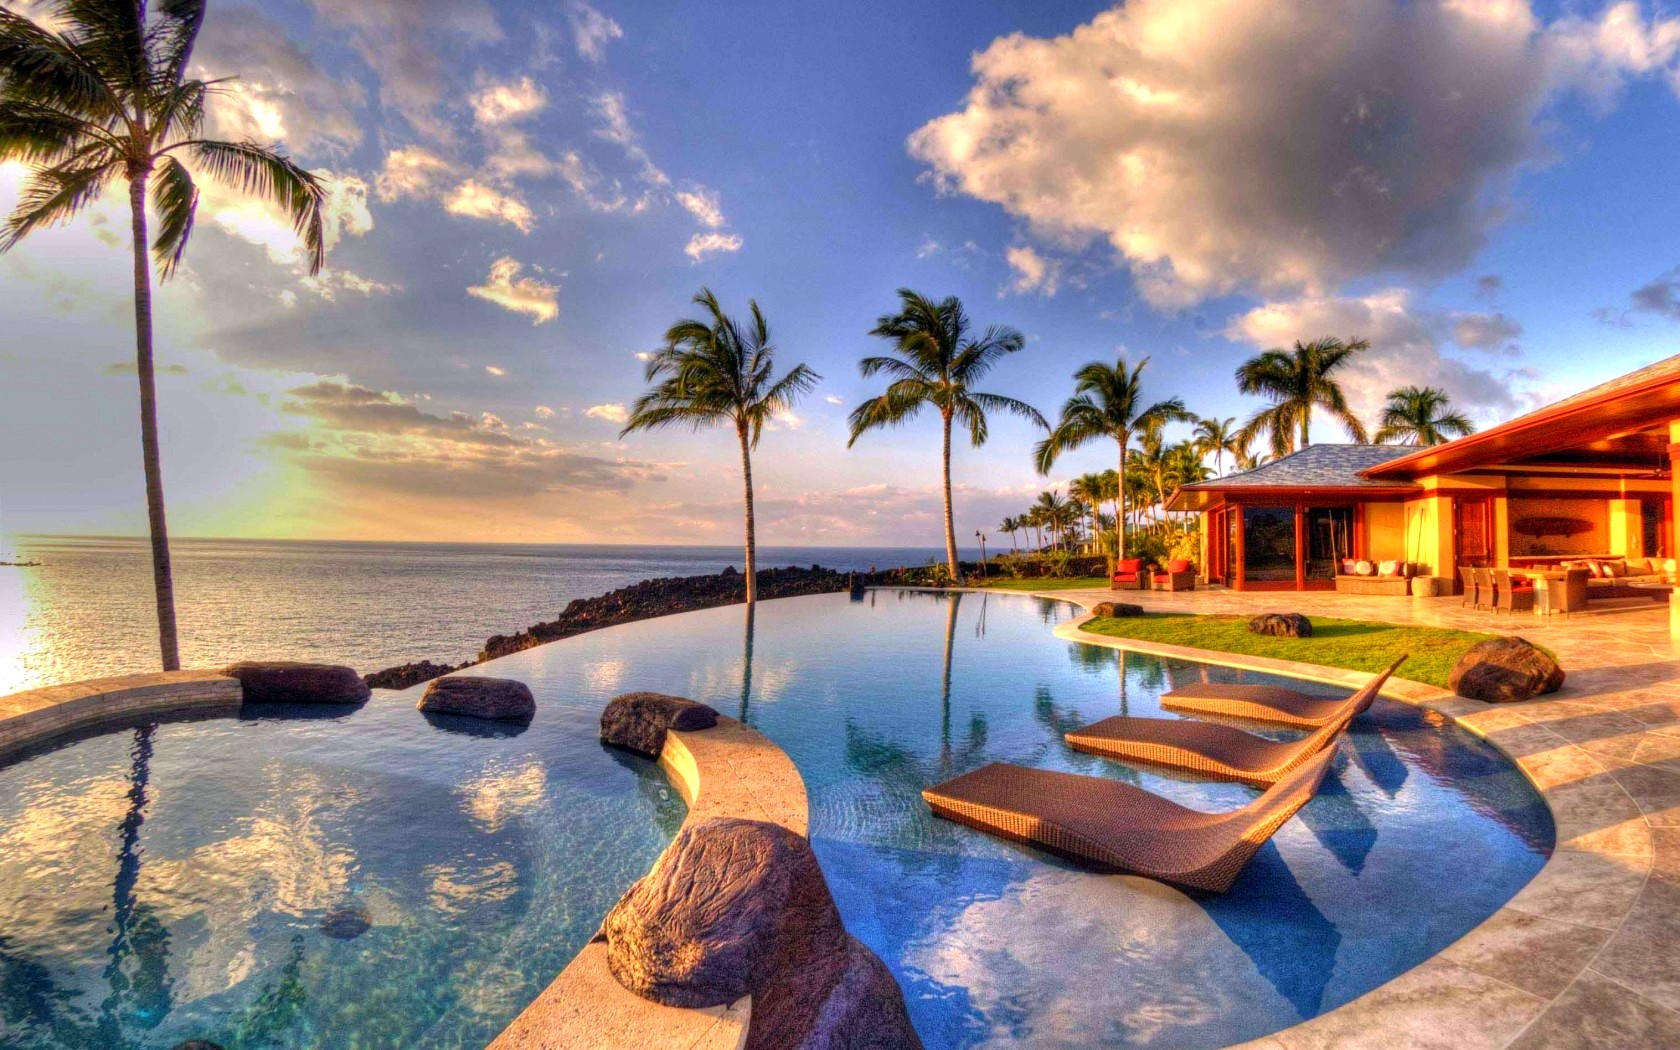 amazing pictures for wallpaper,nature,resort,sky,vacation,swimming pool